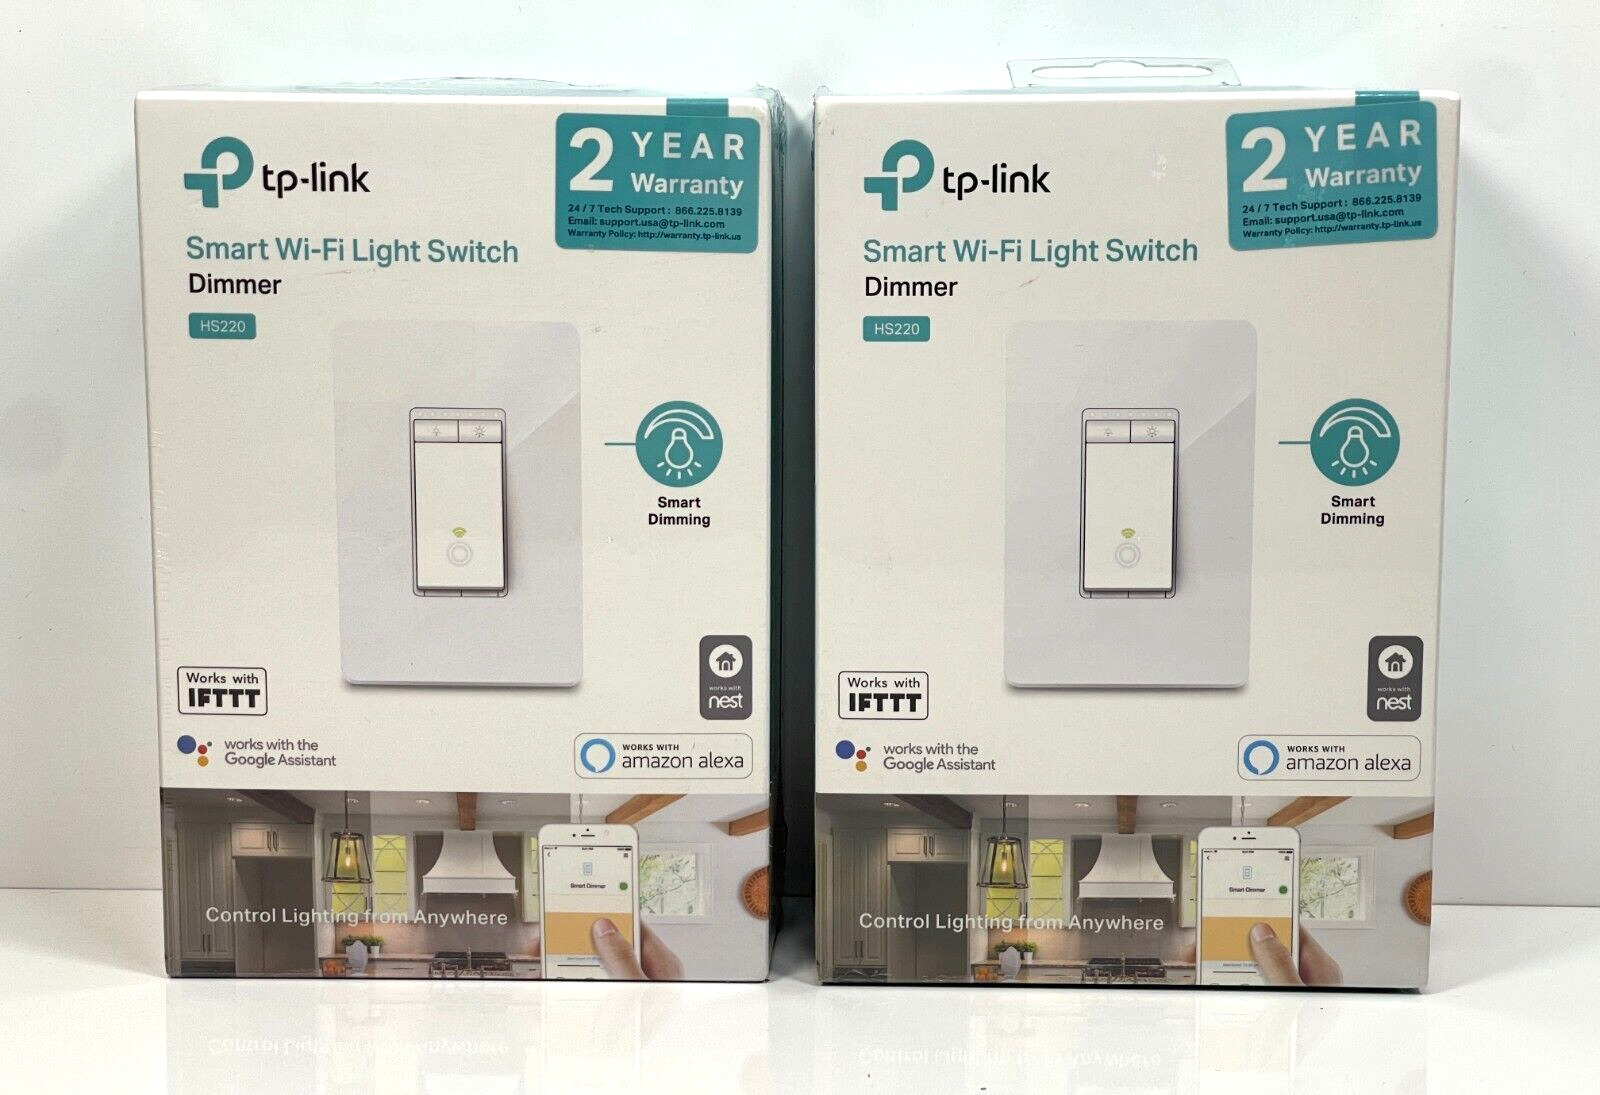 Lot of 2 TP-LINK HS220 Smart Wi-fi Light Switch With Dimmer NEW Sealed